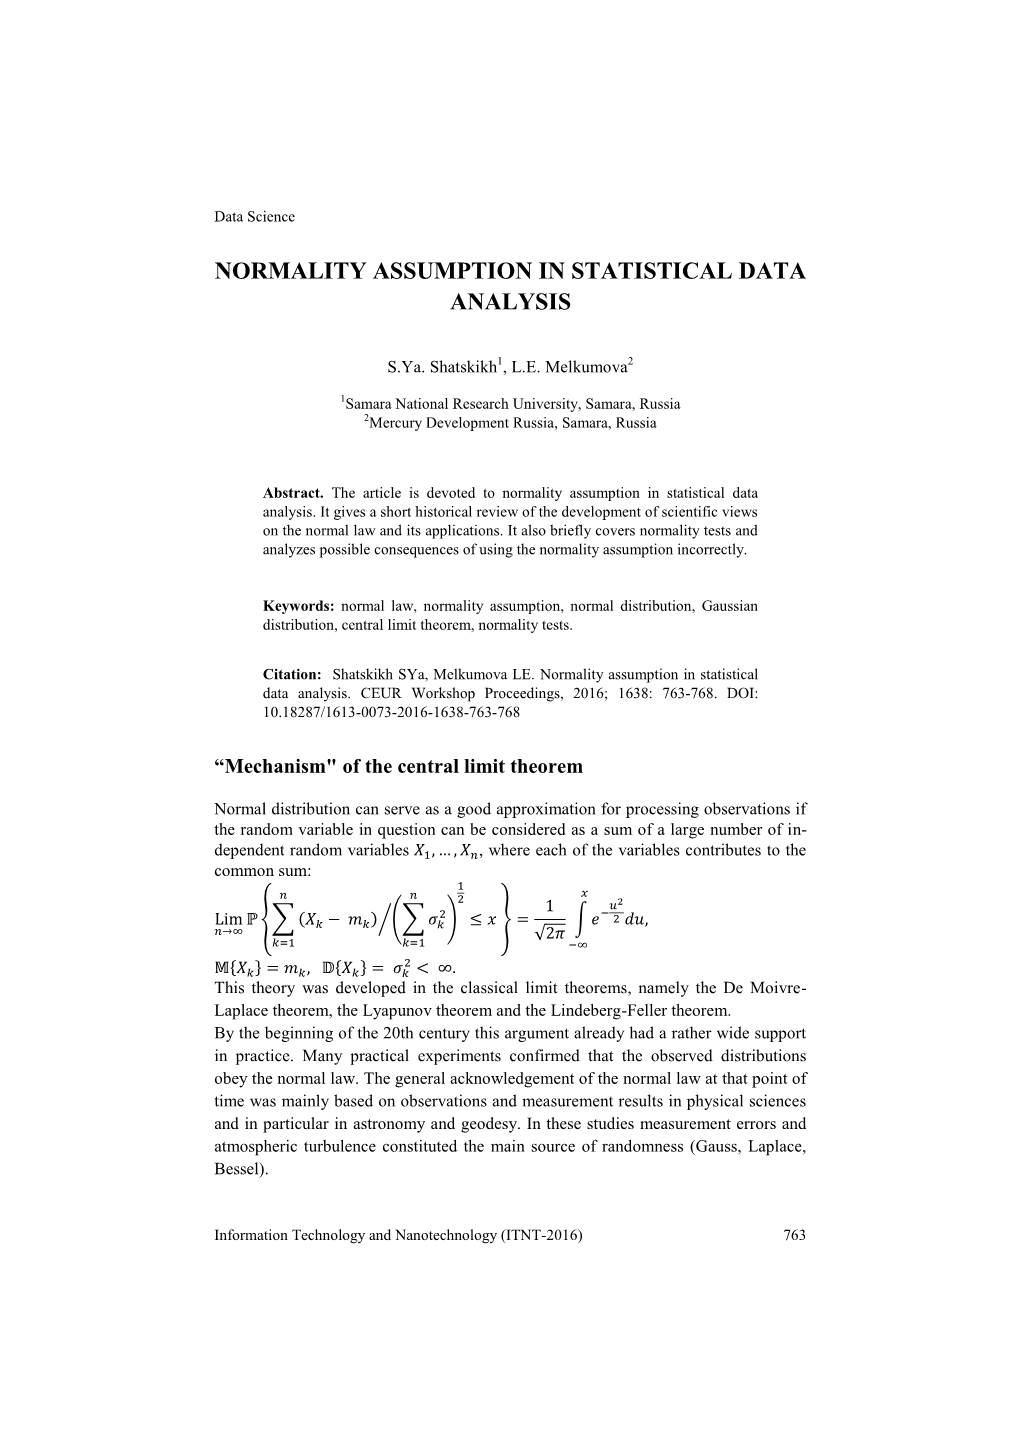 Normality Assumption in Statistical Data Analysis